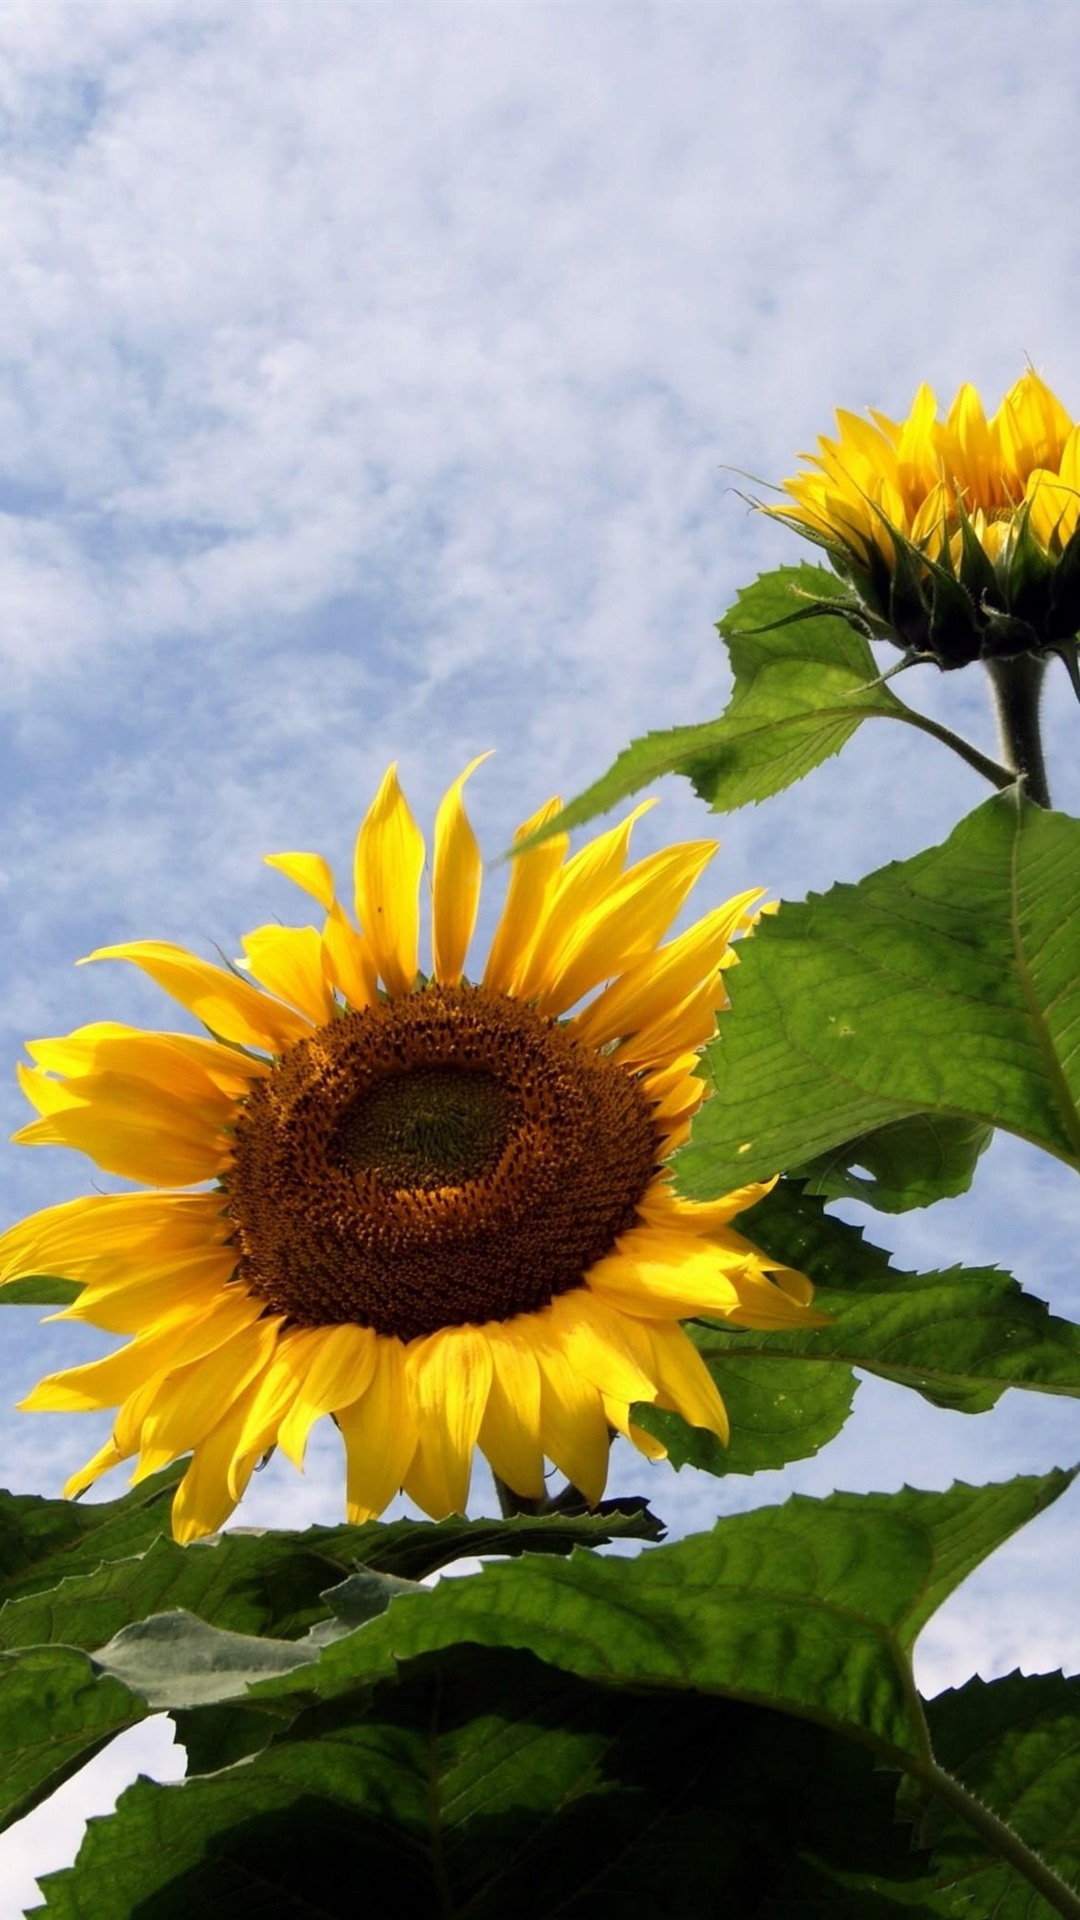 Sunflowers, Sky, Clouds, Summer 1080x1920 IPhone 8 7 6 6S Plus Wallpaper, Background, Picture, Image